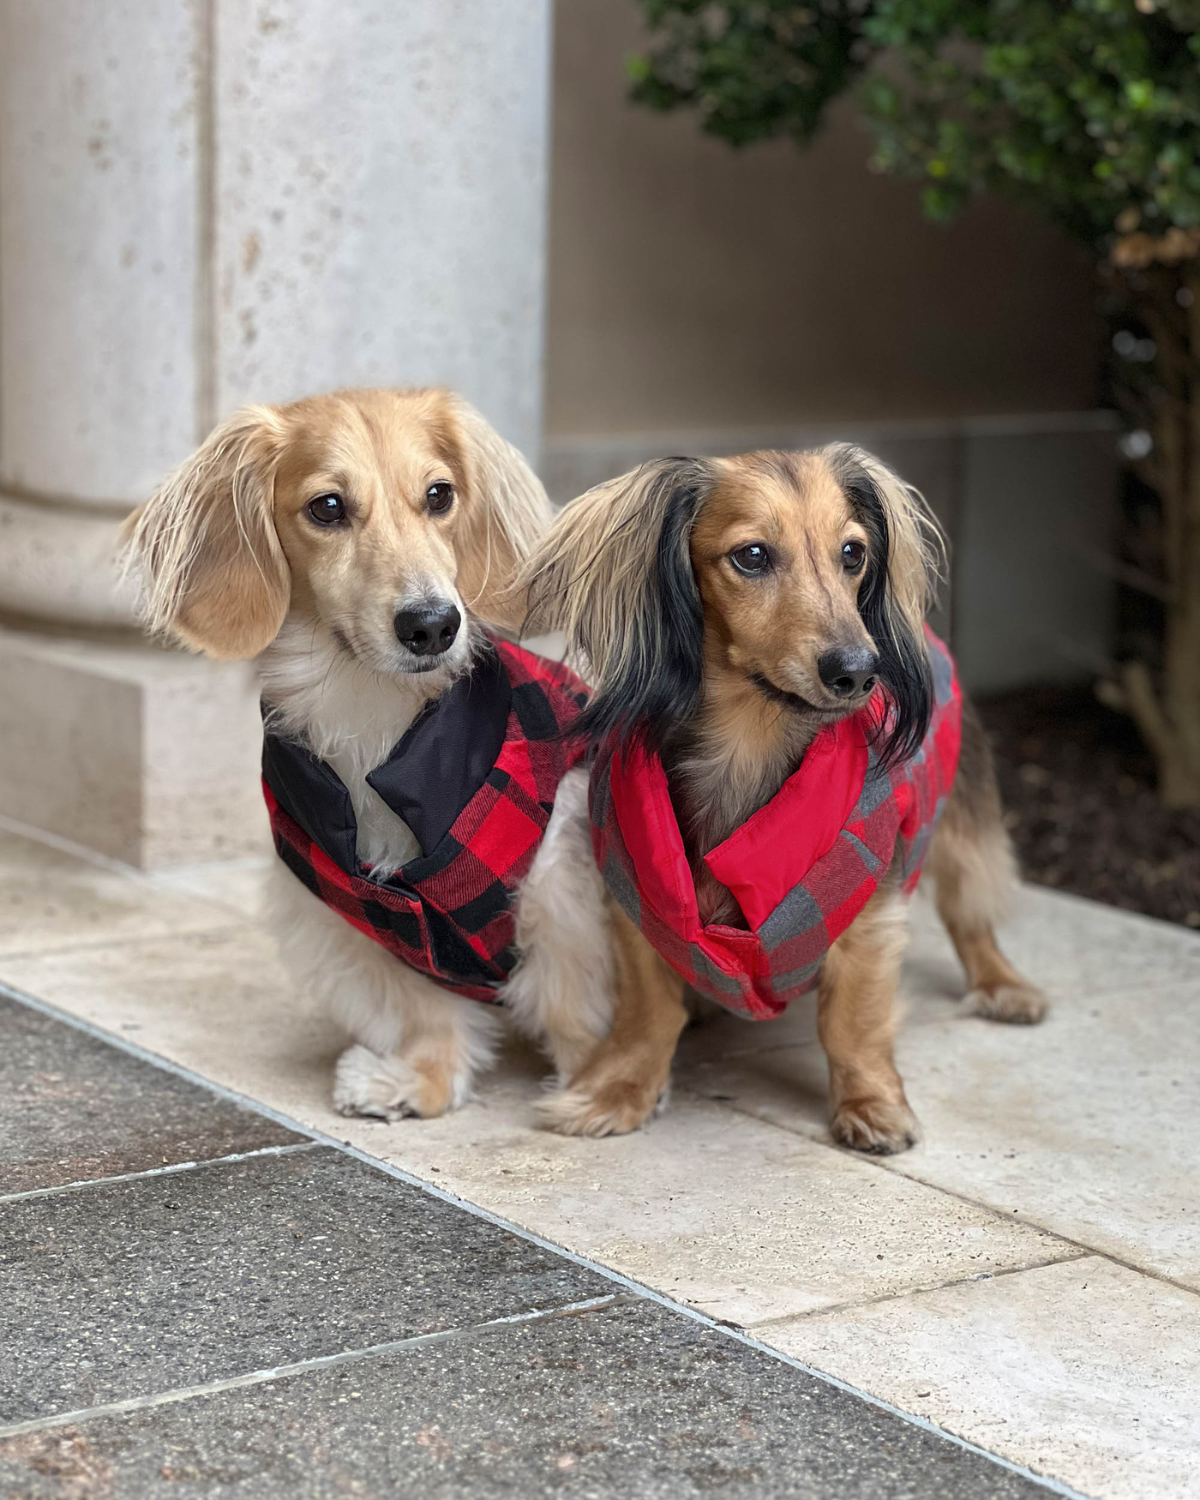 DJANGO's Reversible Puffer Dog Coat features a super cozy interior lining that can be worn facing outwards. Dog and their hoomans love the oversized armholes, adjustable hem, and spacious and easy-access leash portal - djangobrand.com